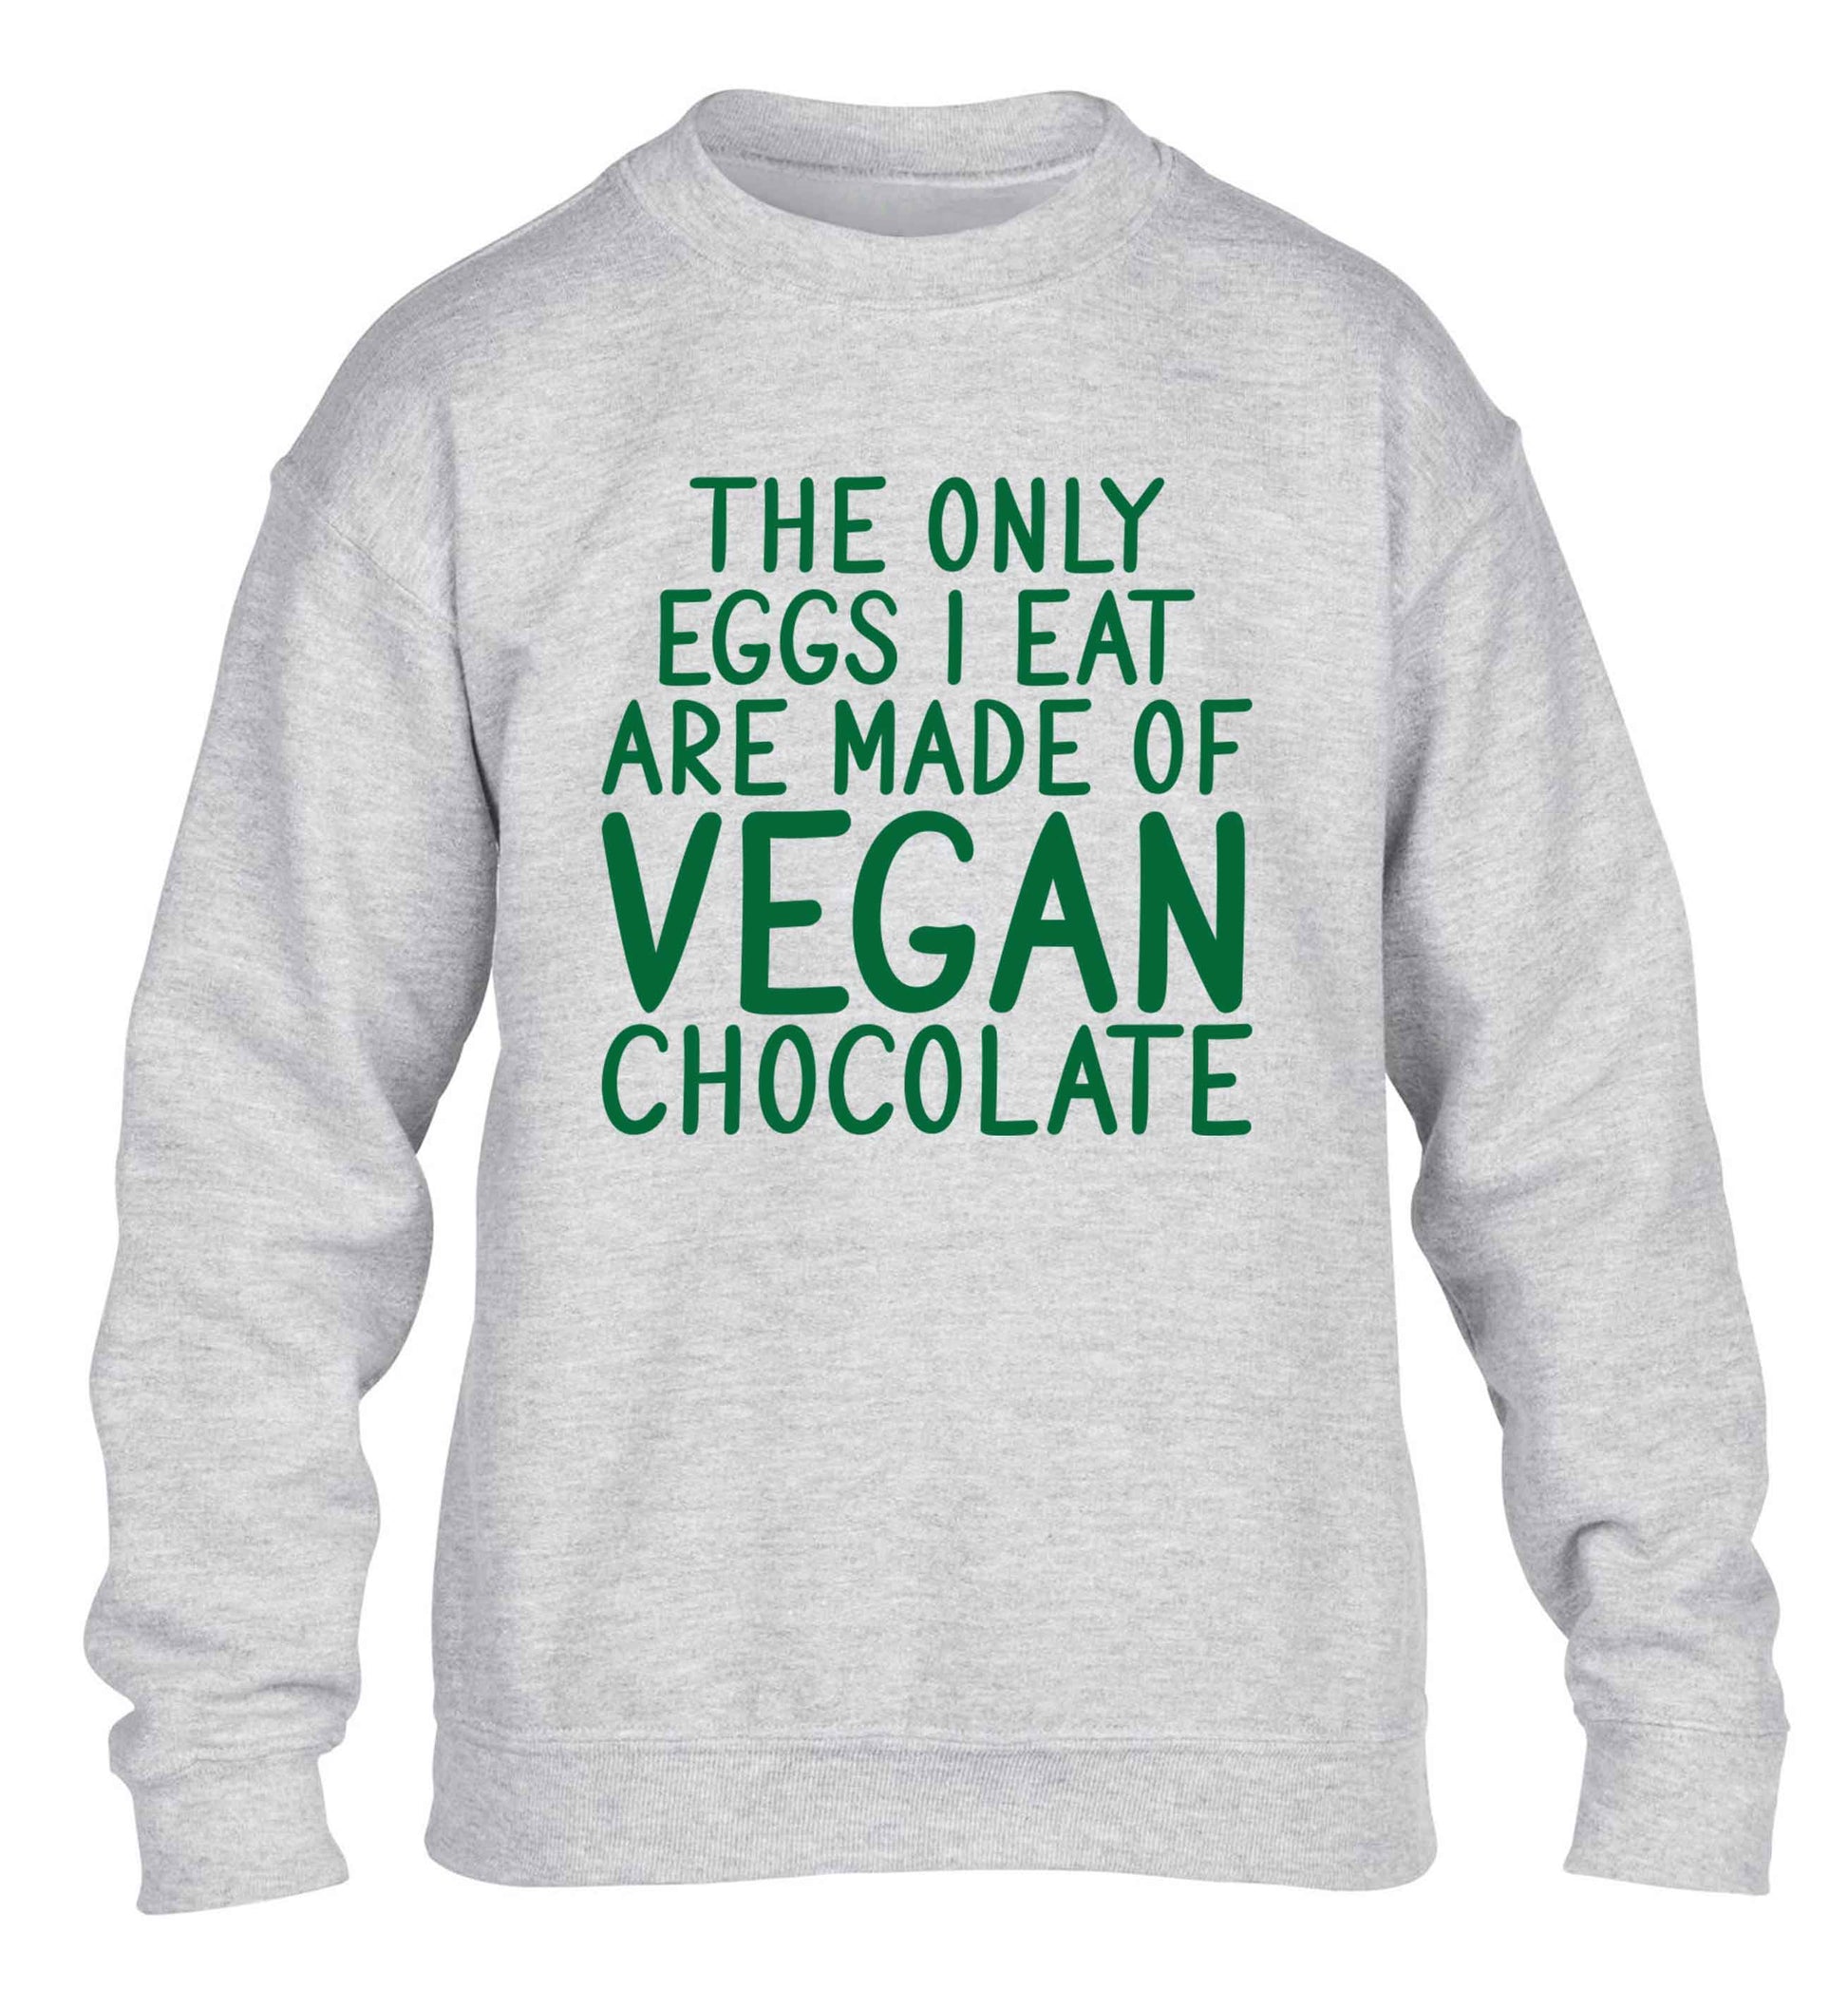 The only eggs I eat are made of vegan chocolate children's grey sweater 12-13 Years